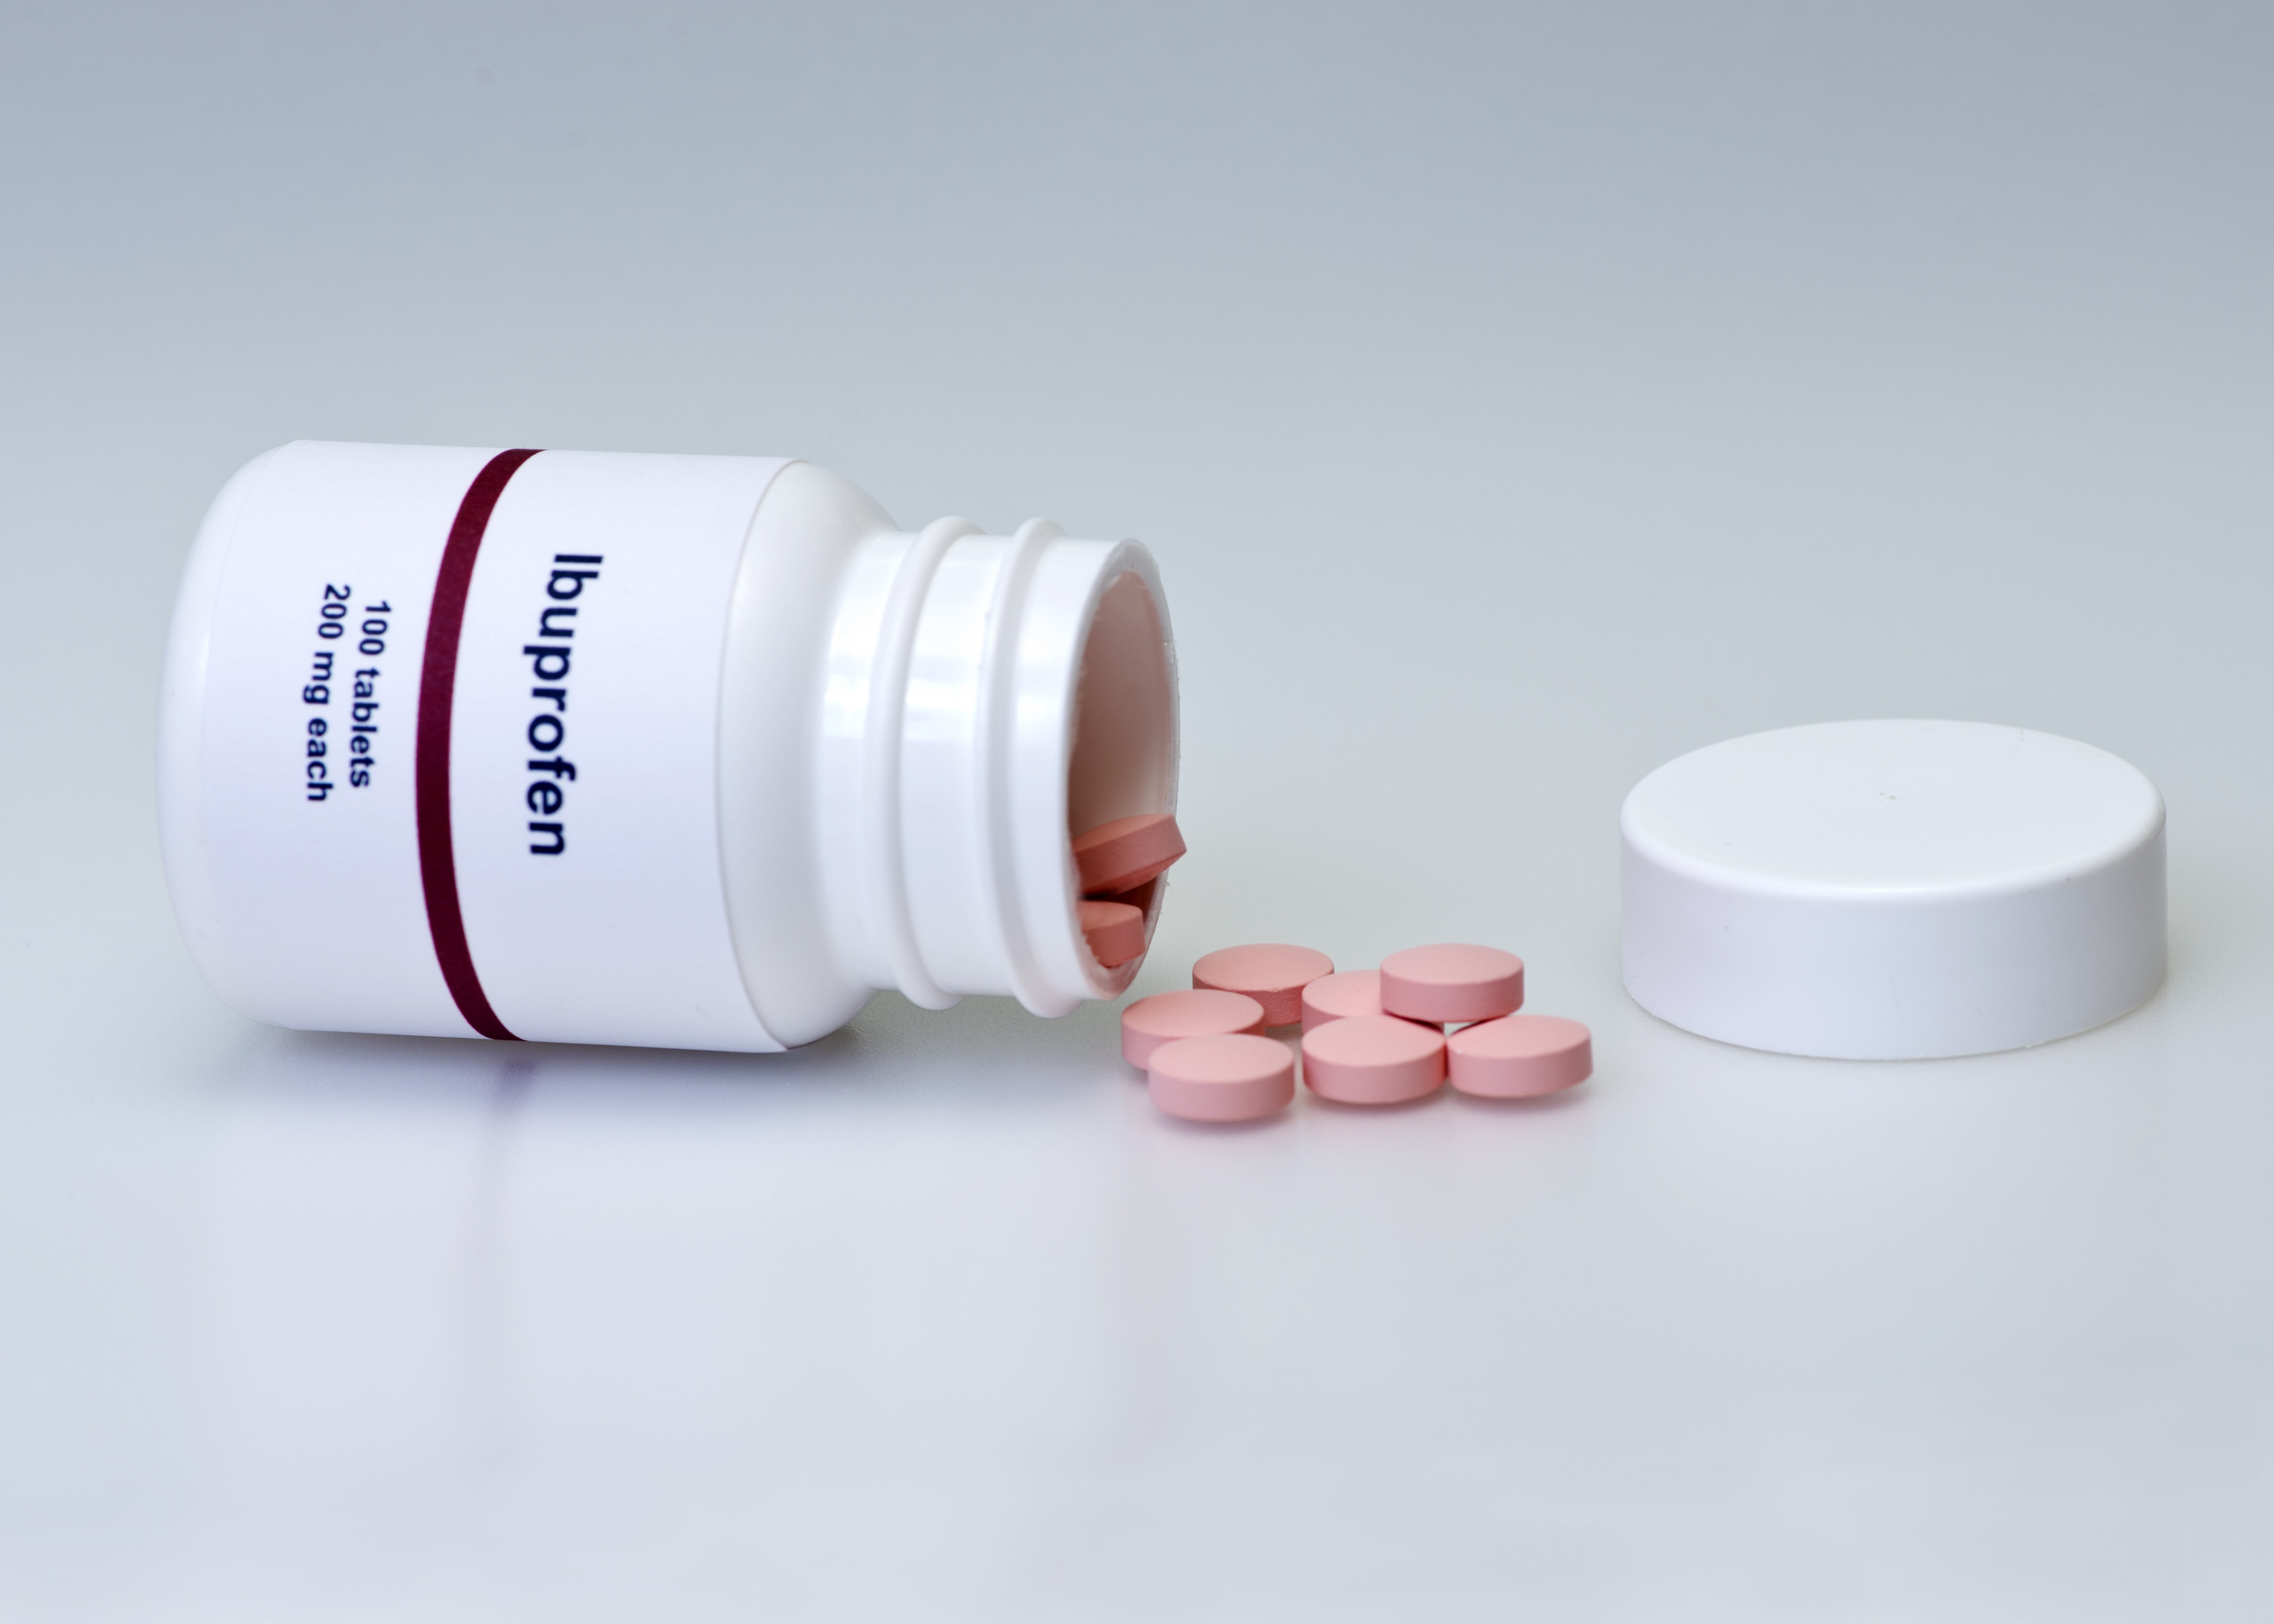 Ibuprofen bottle and tablets. Label is not real | Photo: Shutterstock.com